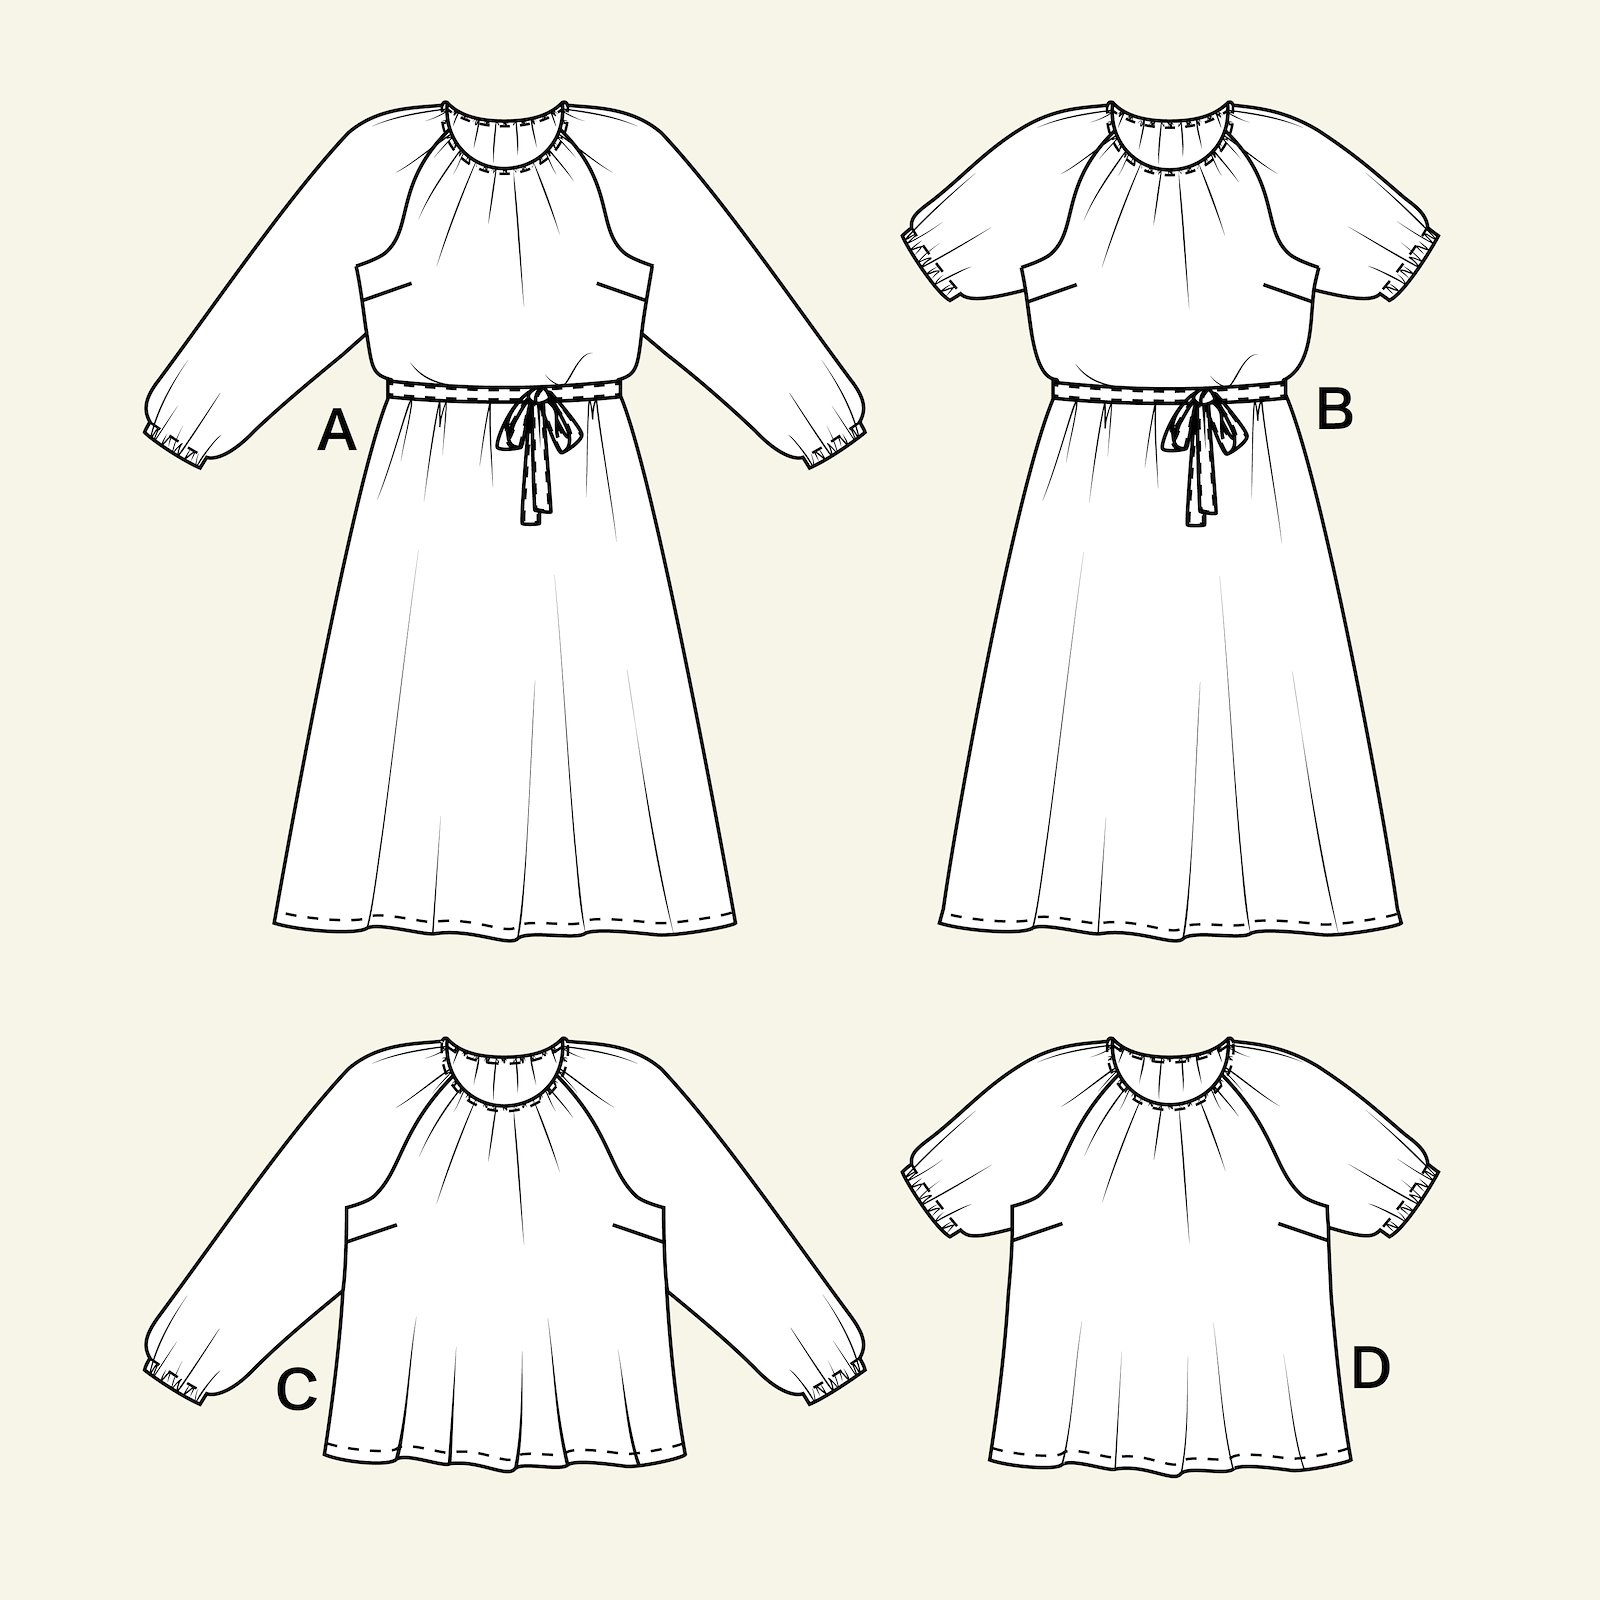 Dress with belt and blouse, 46/18 p23167000_p23167001_p23167002_p23167003_p23167004_pack_b.png